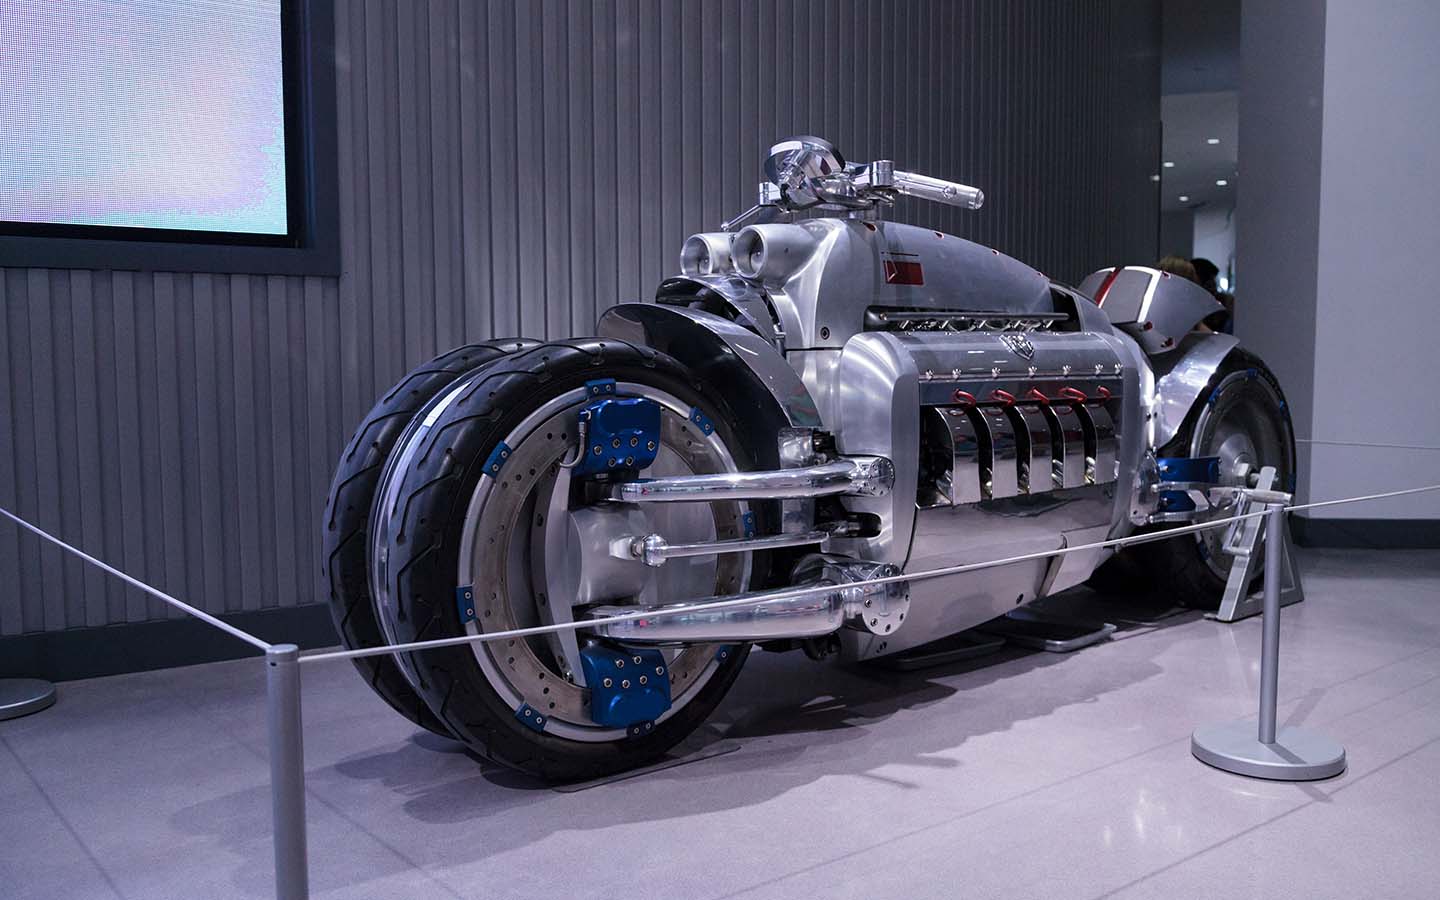 the dodge tomahawk is one of the fastest motorcycles in the world